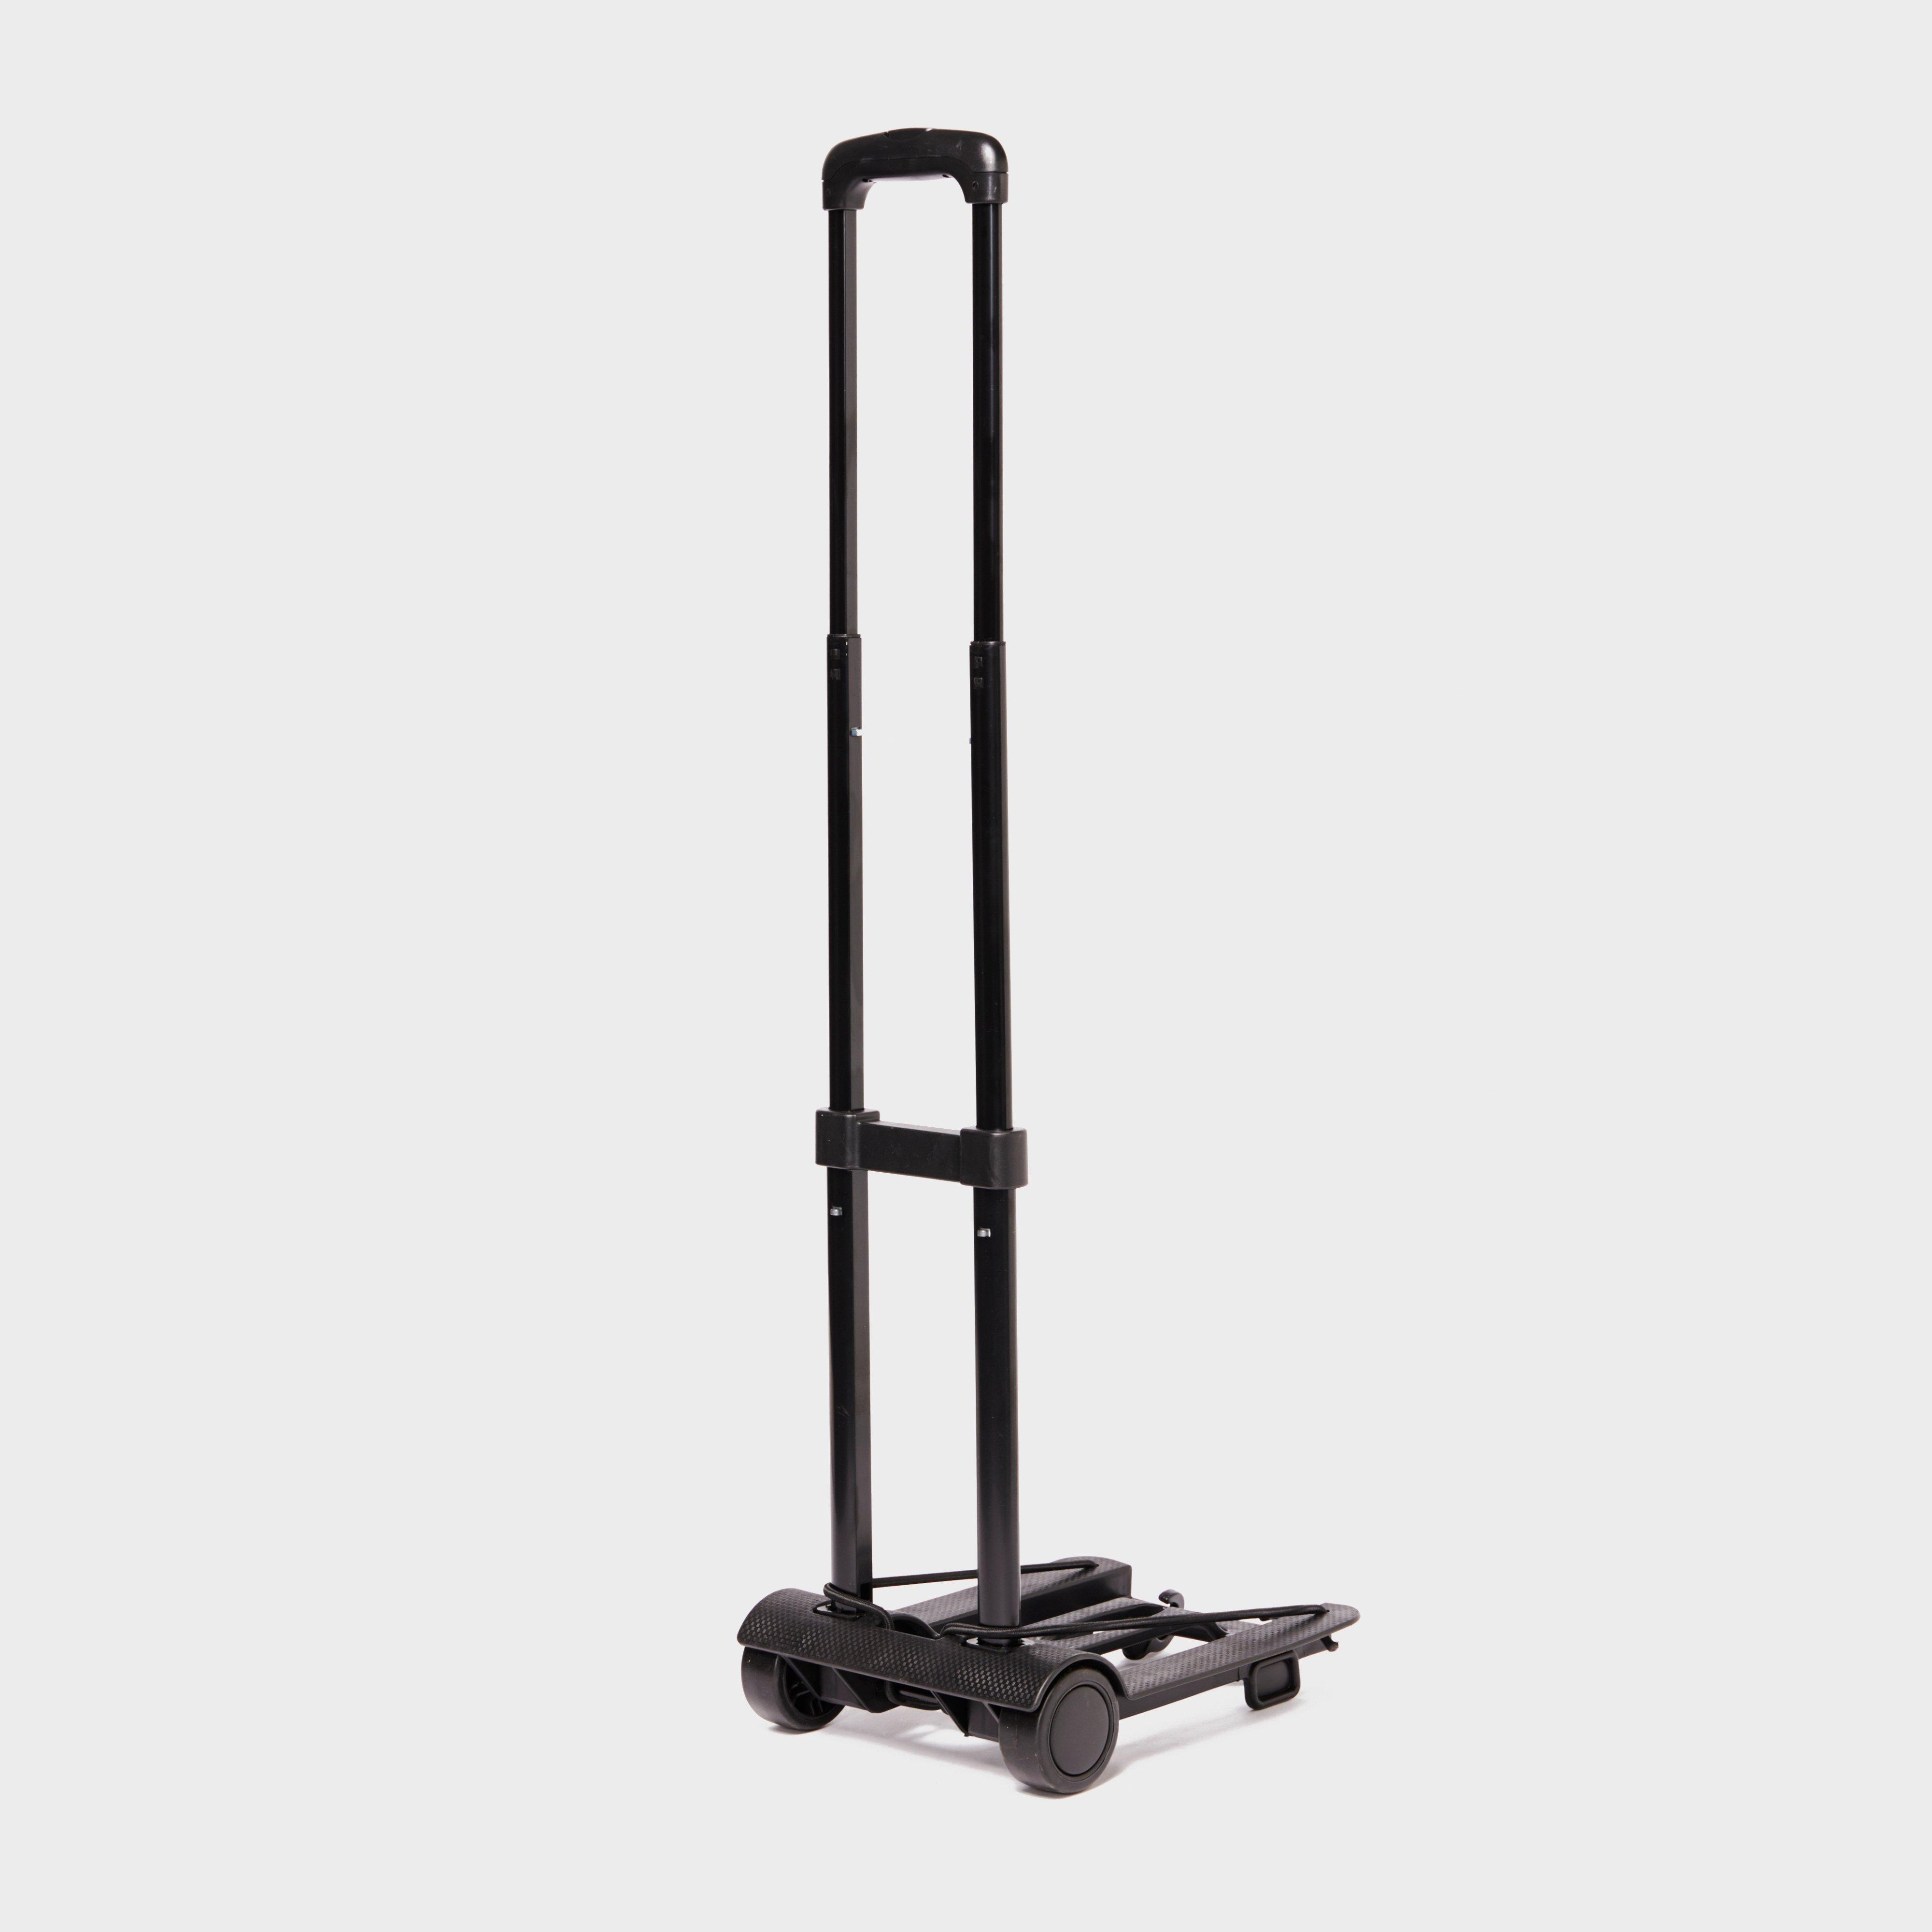 Technicals Folding Luggage Cart Review